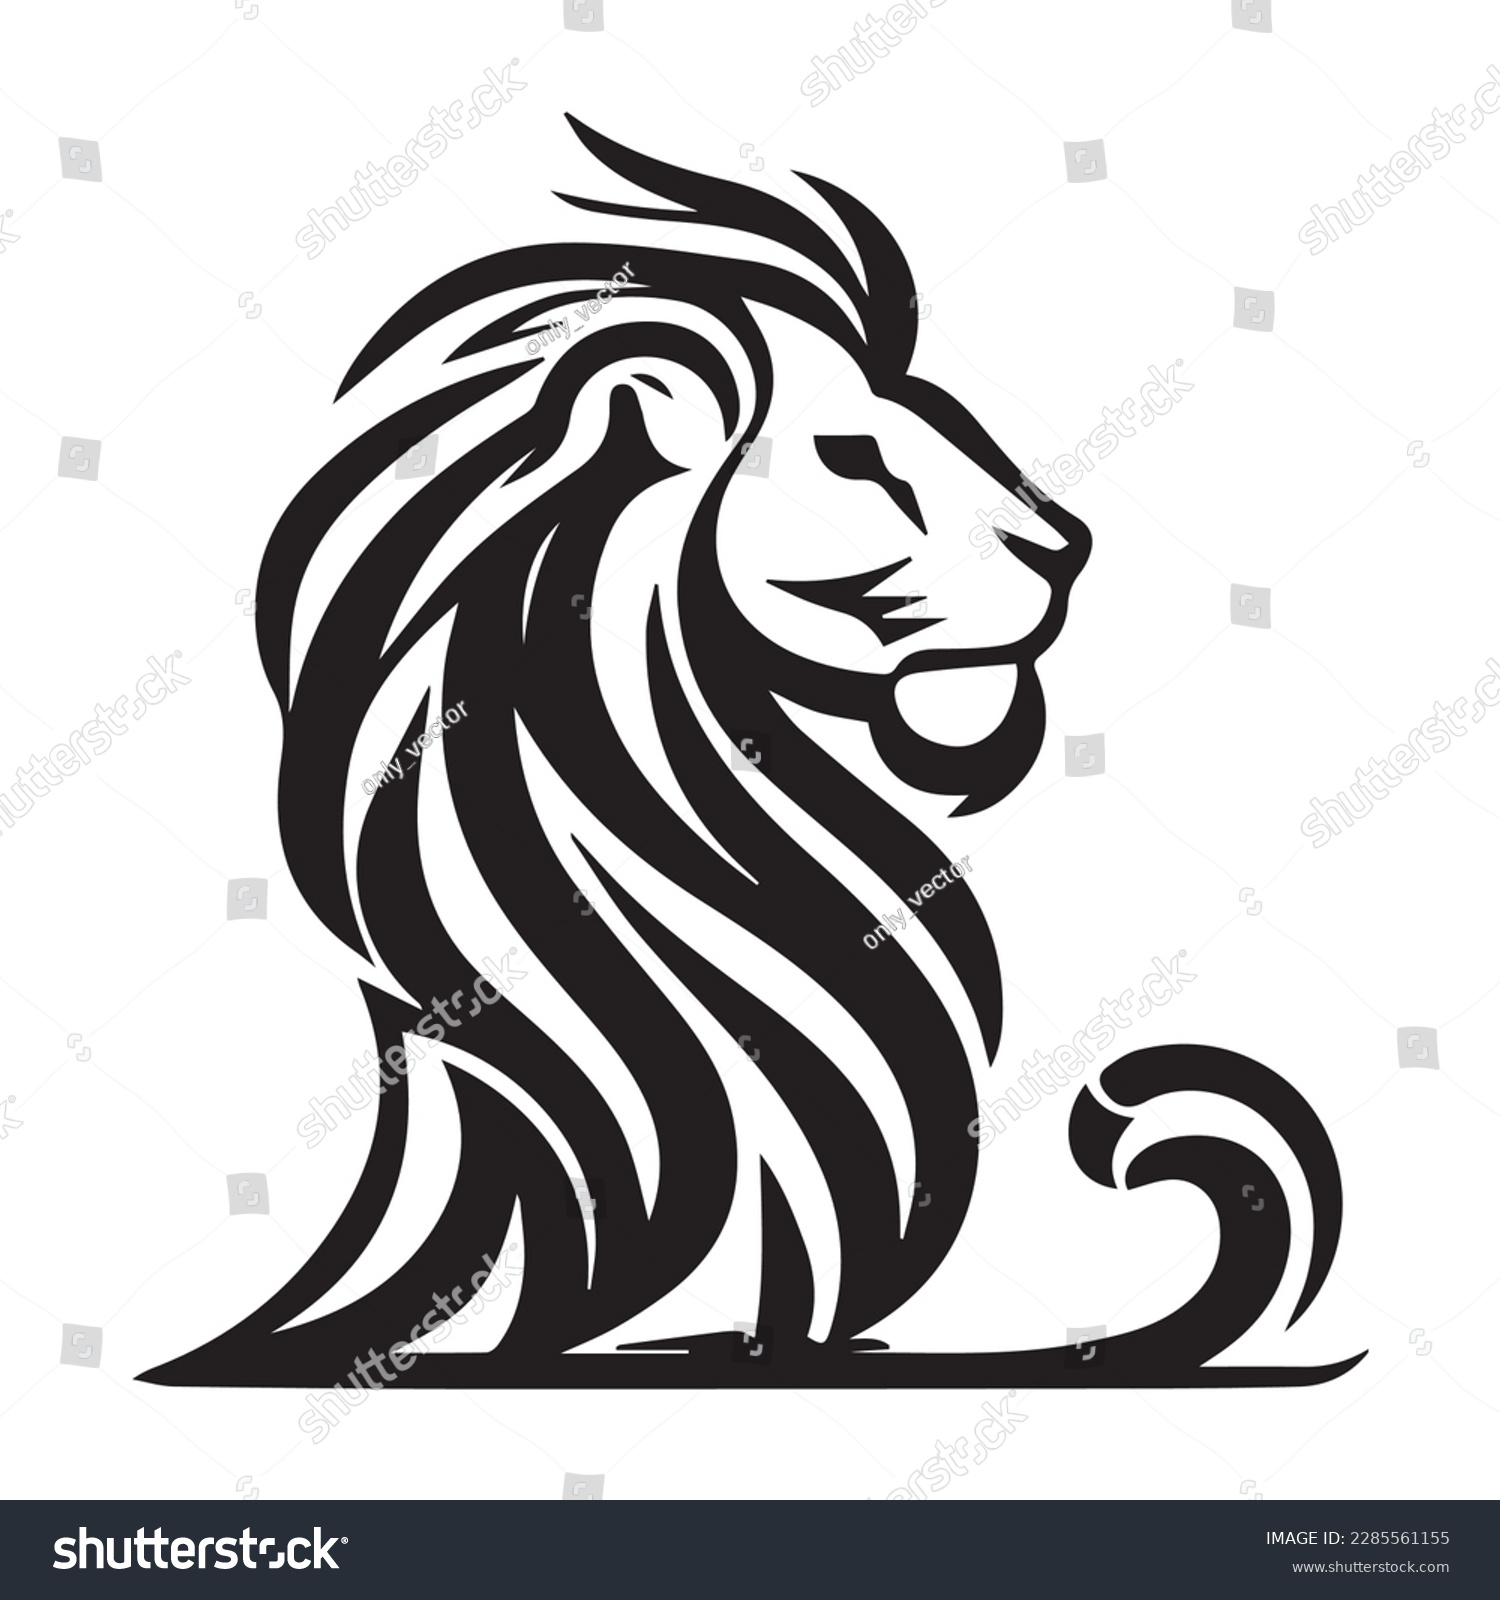 SVG of Vector image of a lion head on a white background. Silhouette svg illustration. svg